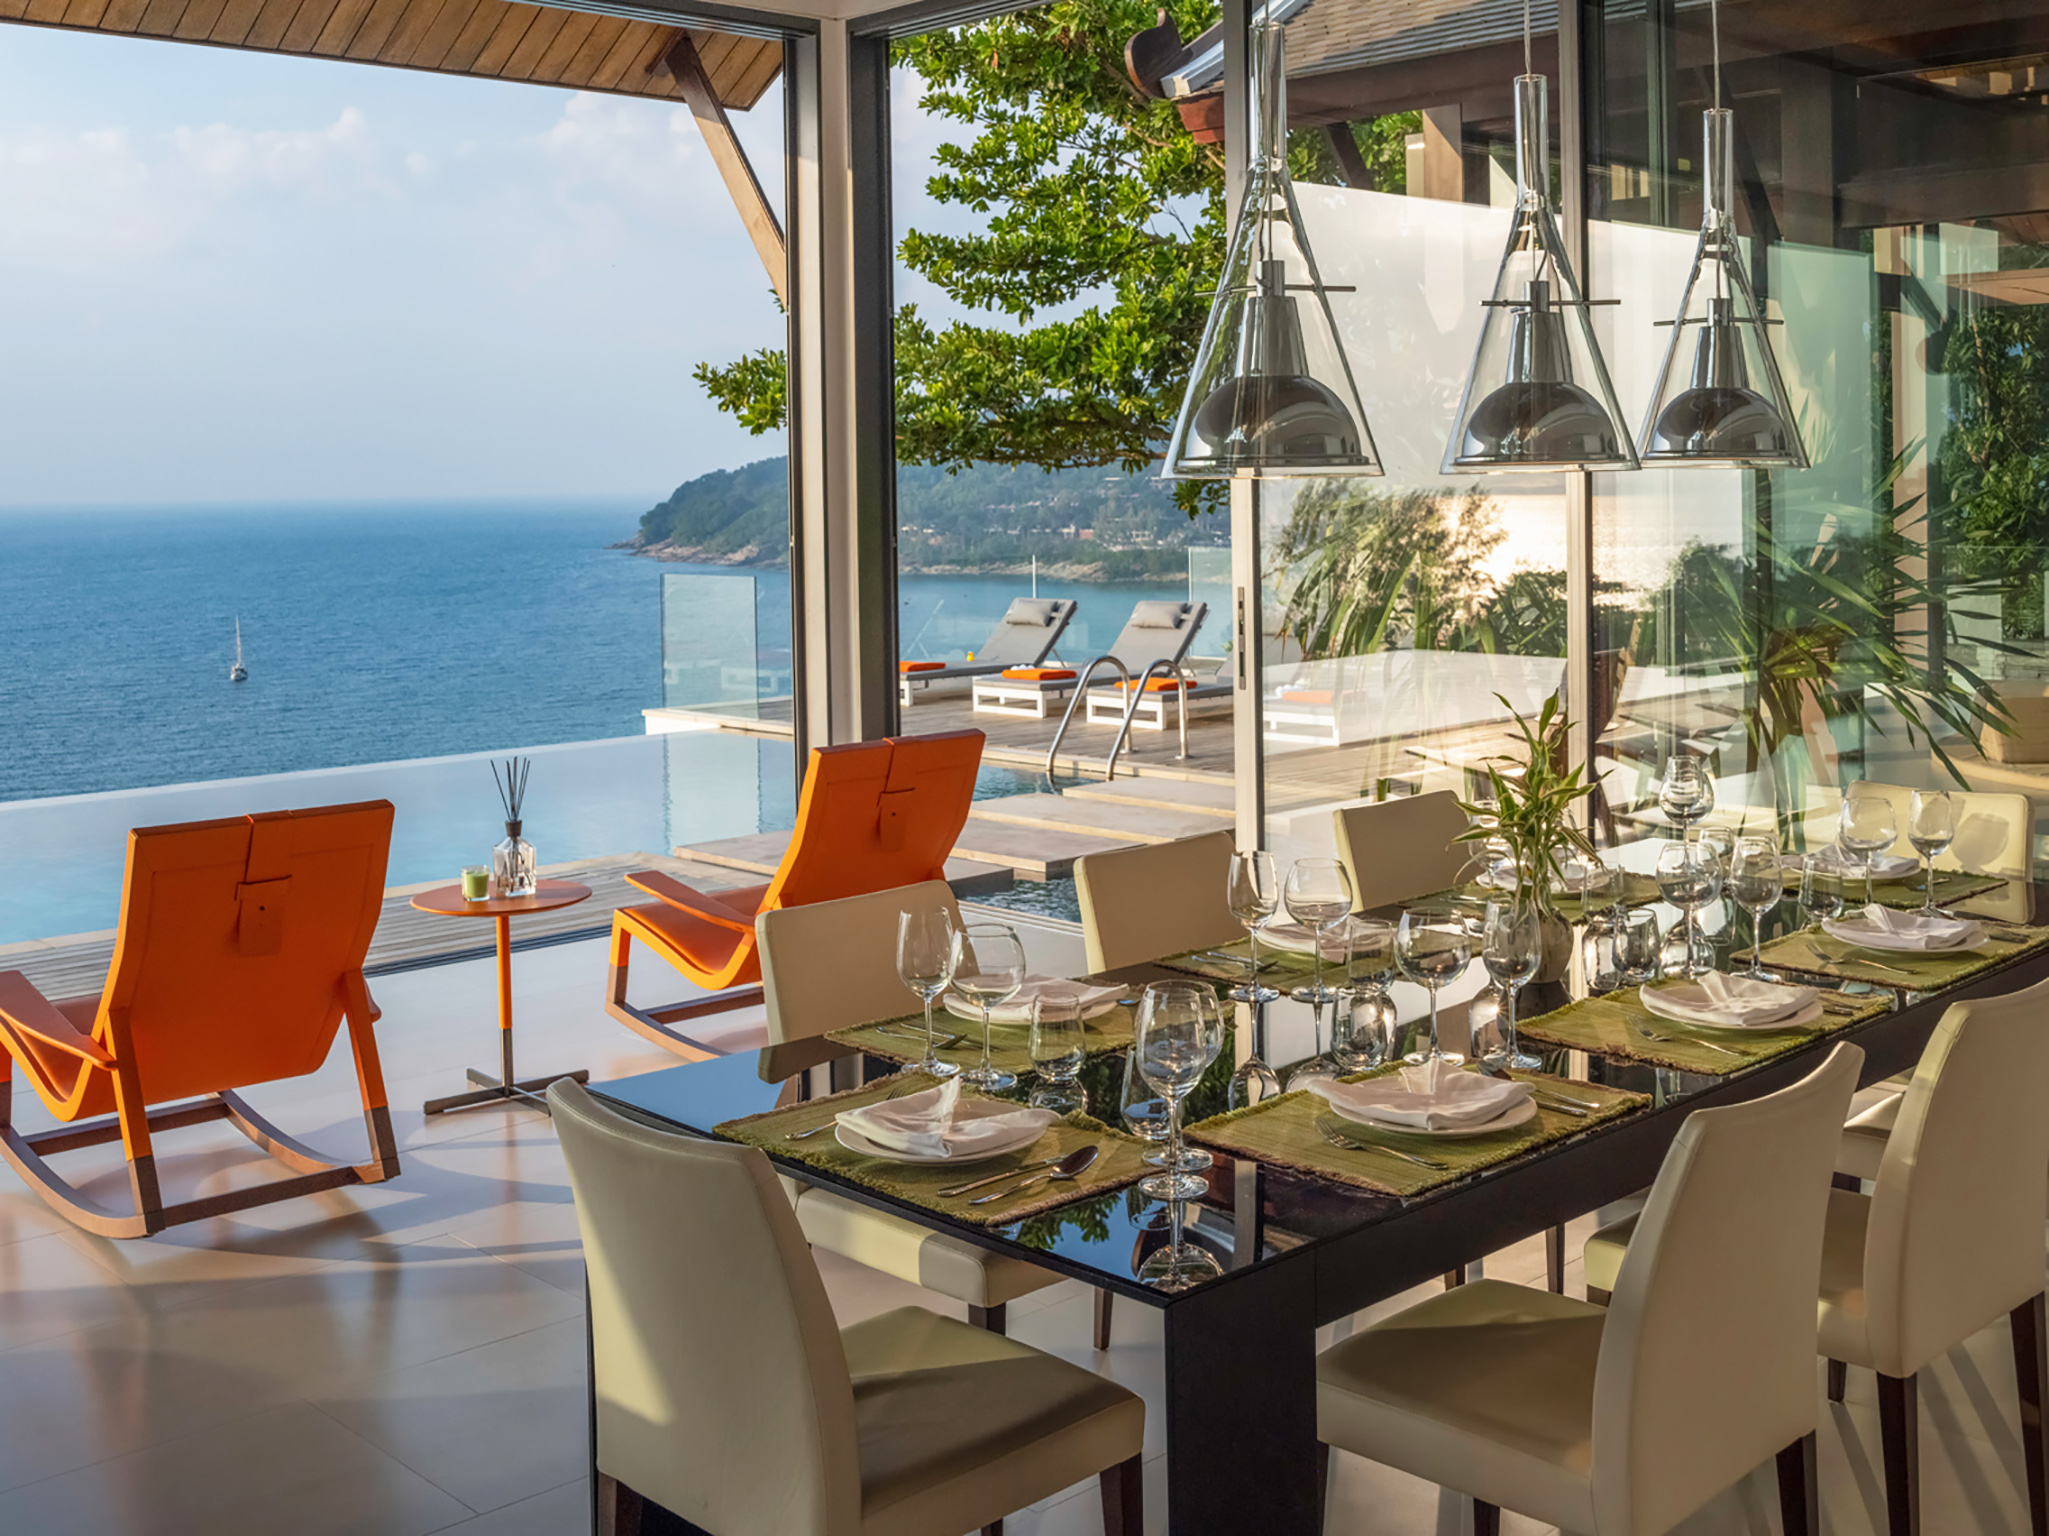 Villa Chan Paa - Dining area with breathtaking view